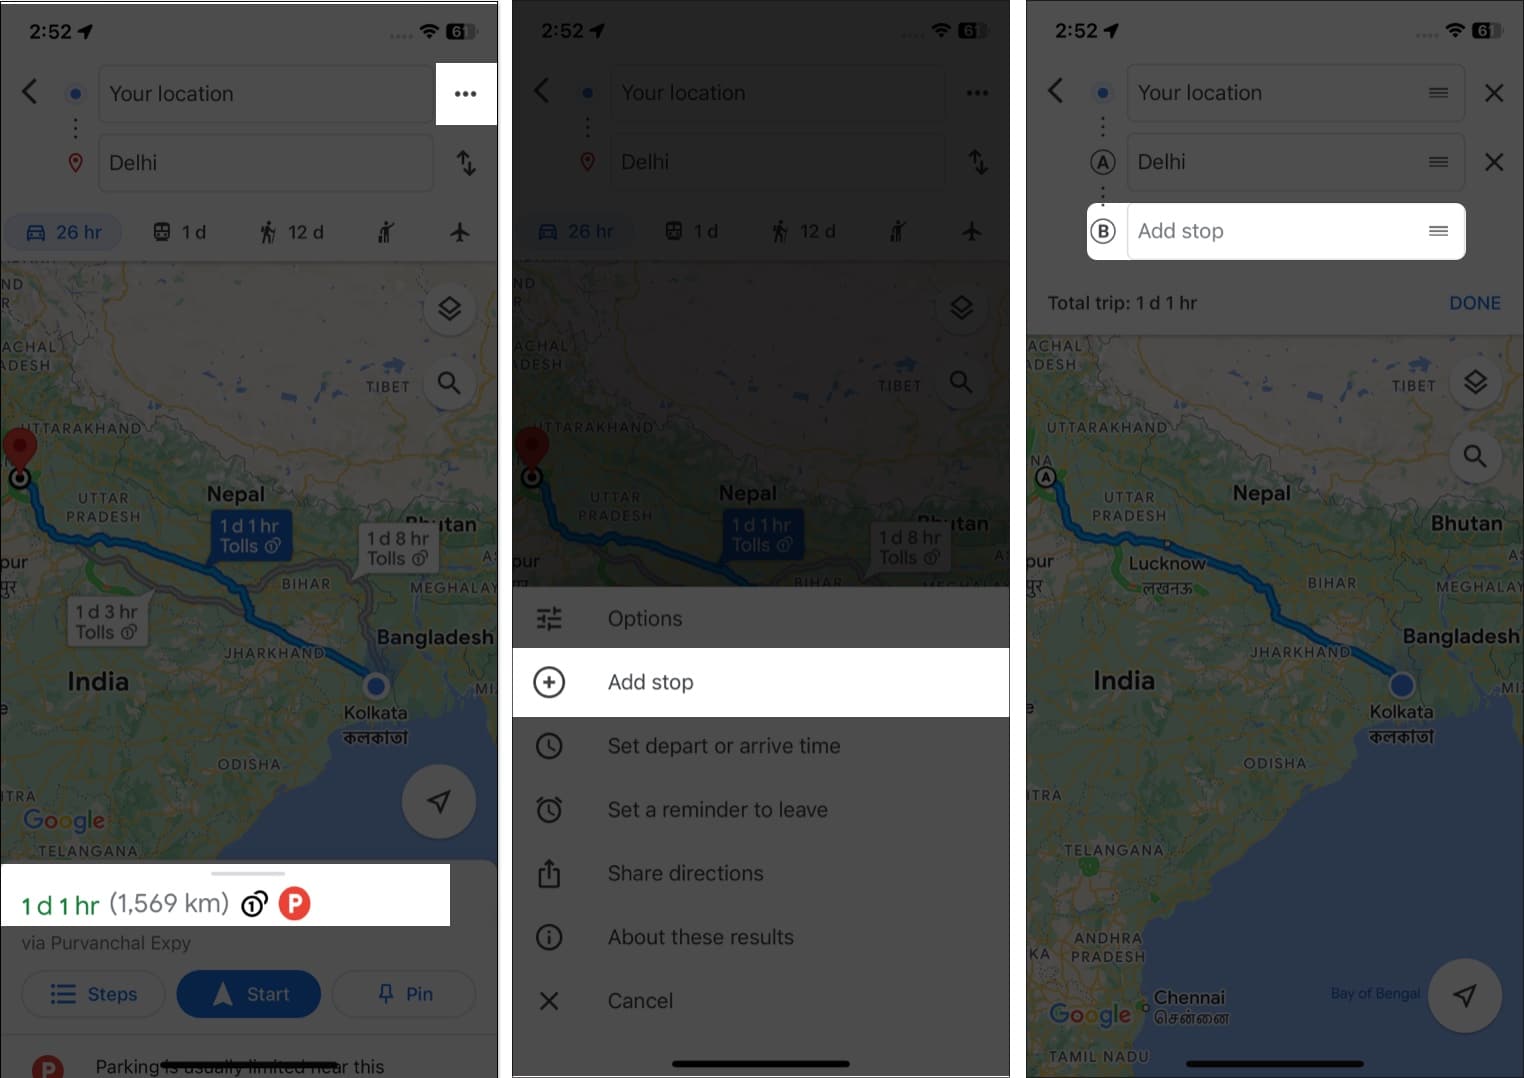 Steps to add multiple stops to your itenary on Google Maps